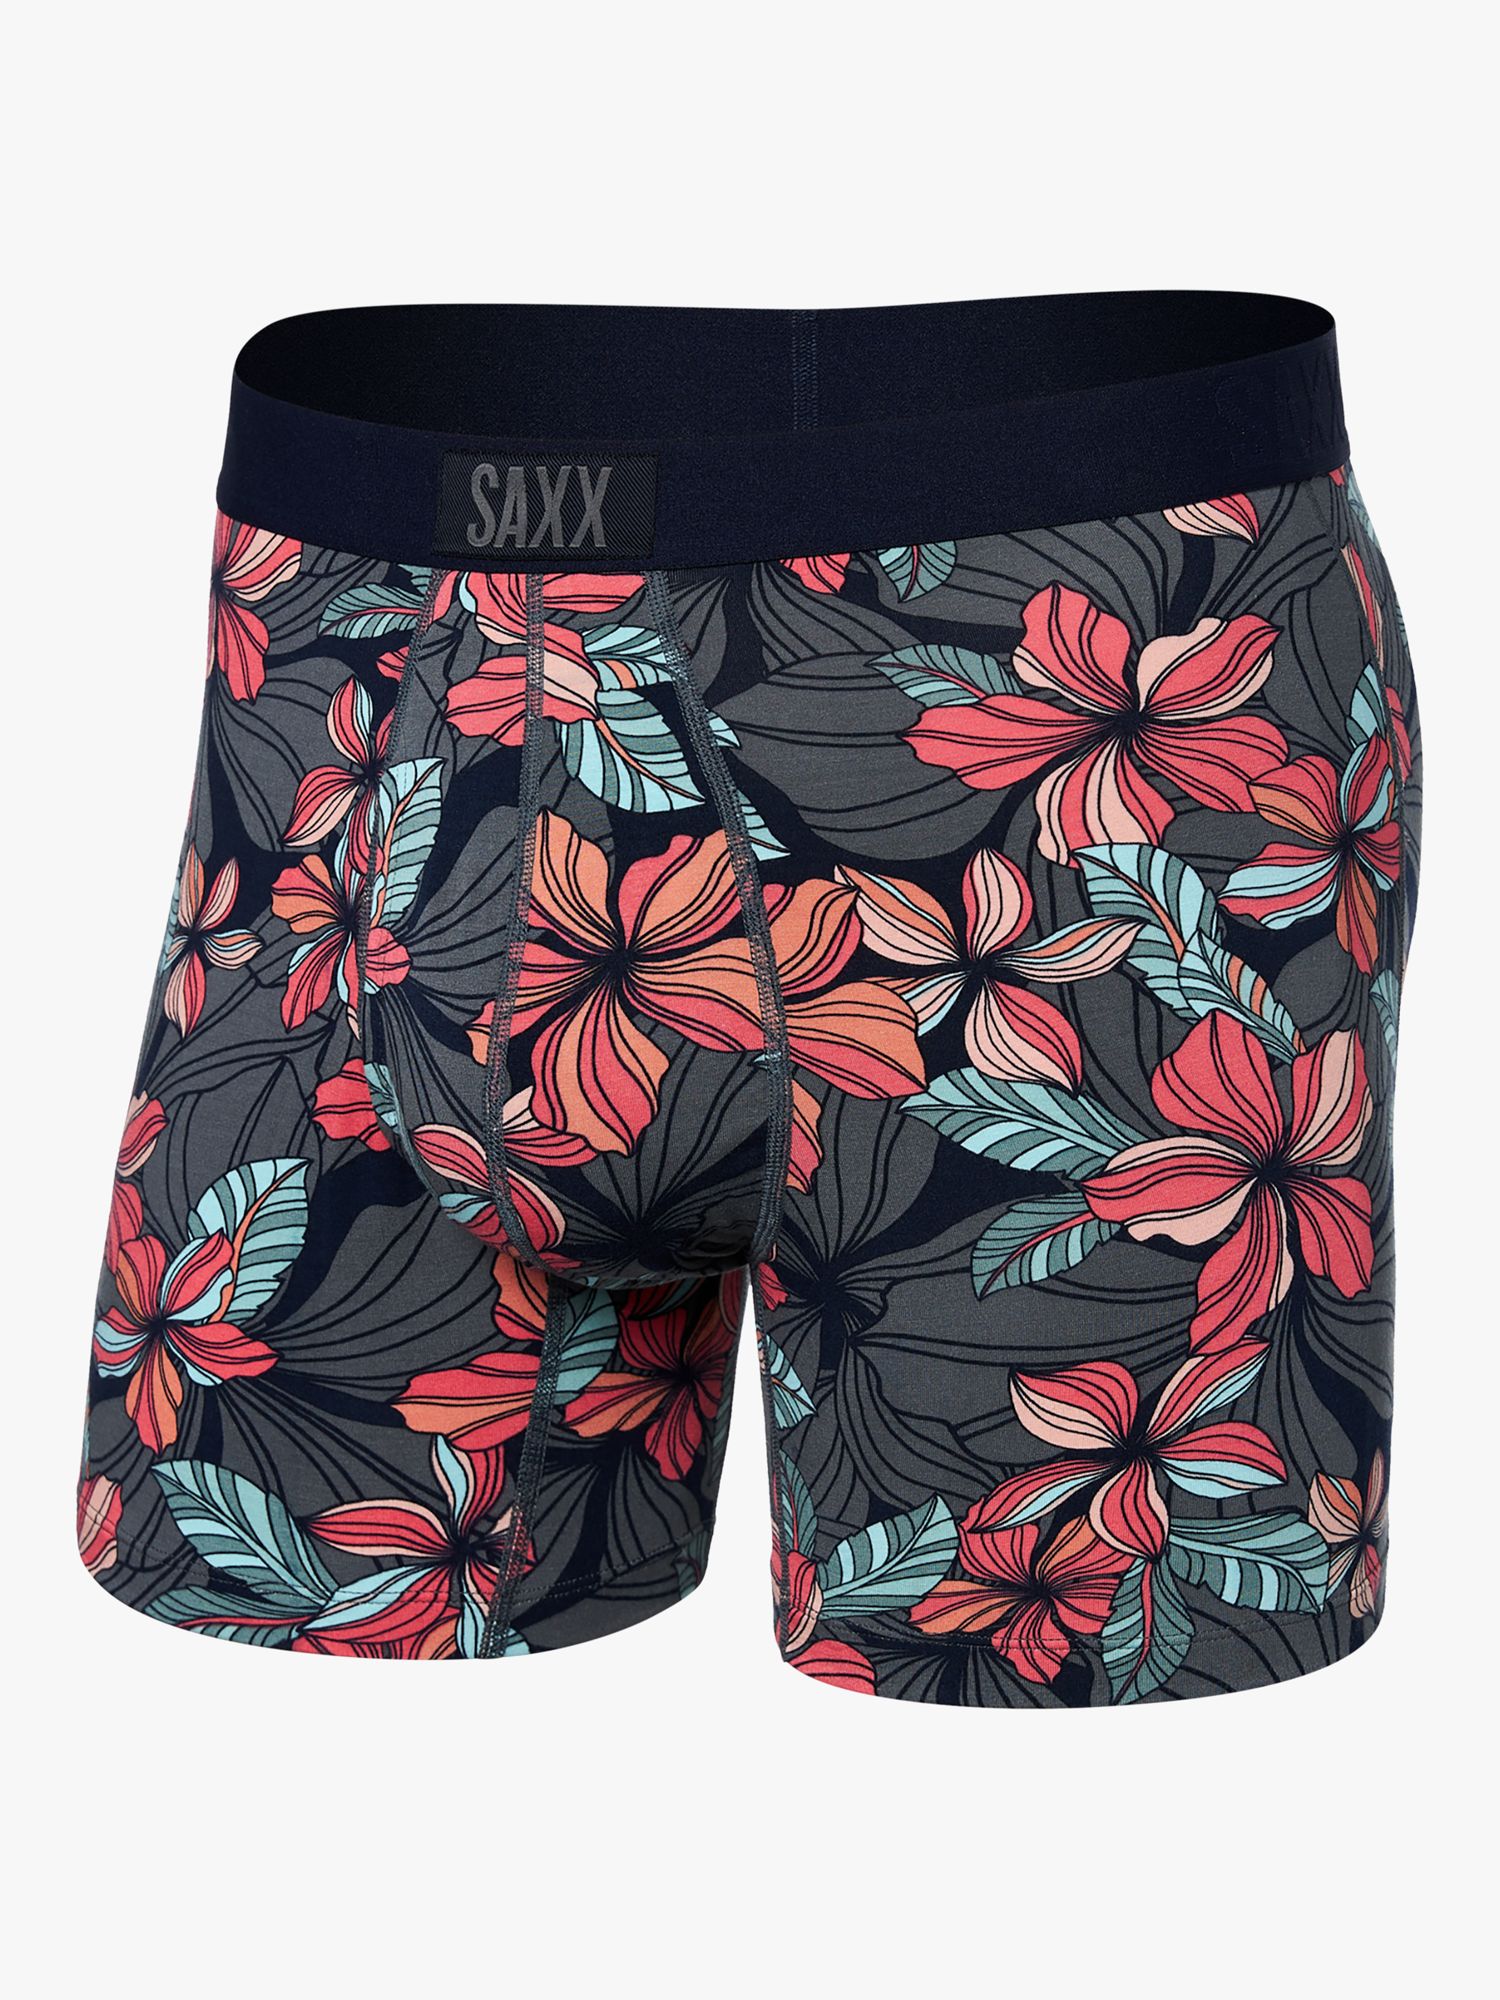 SAXX Jungle Relaxed Fit Trunks, Multi at John Lewis & Partners